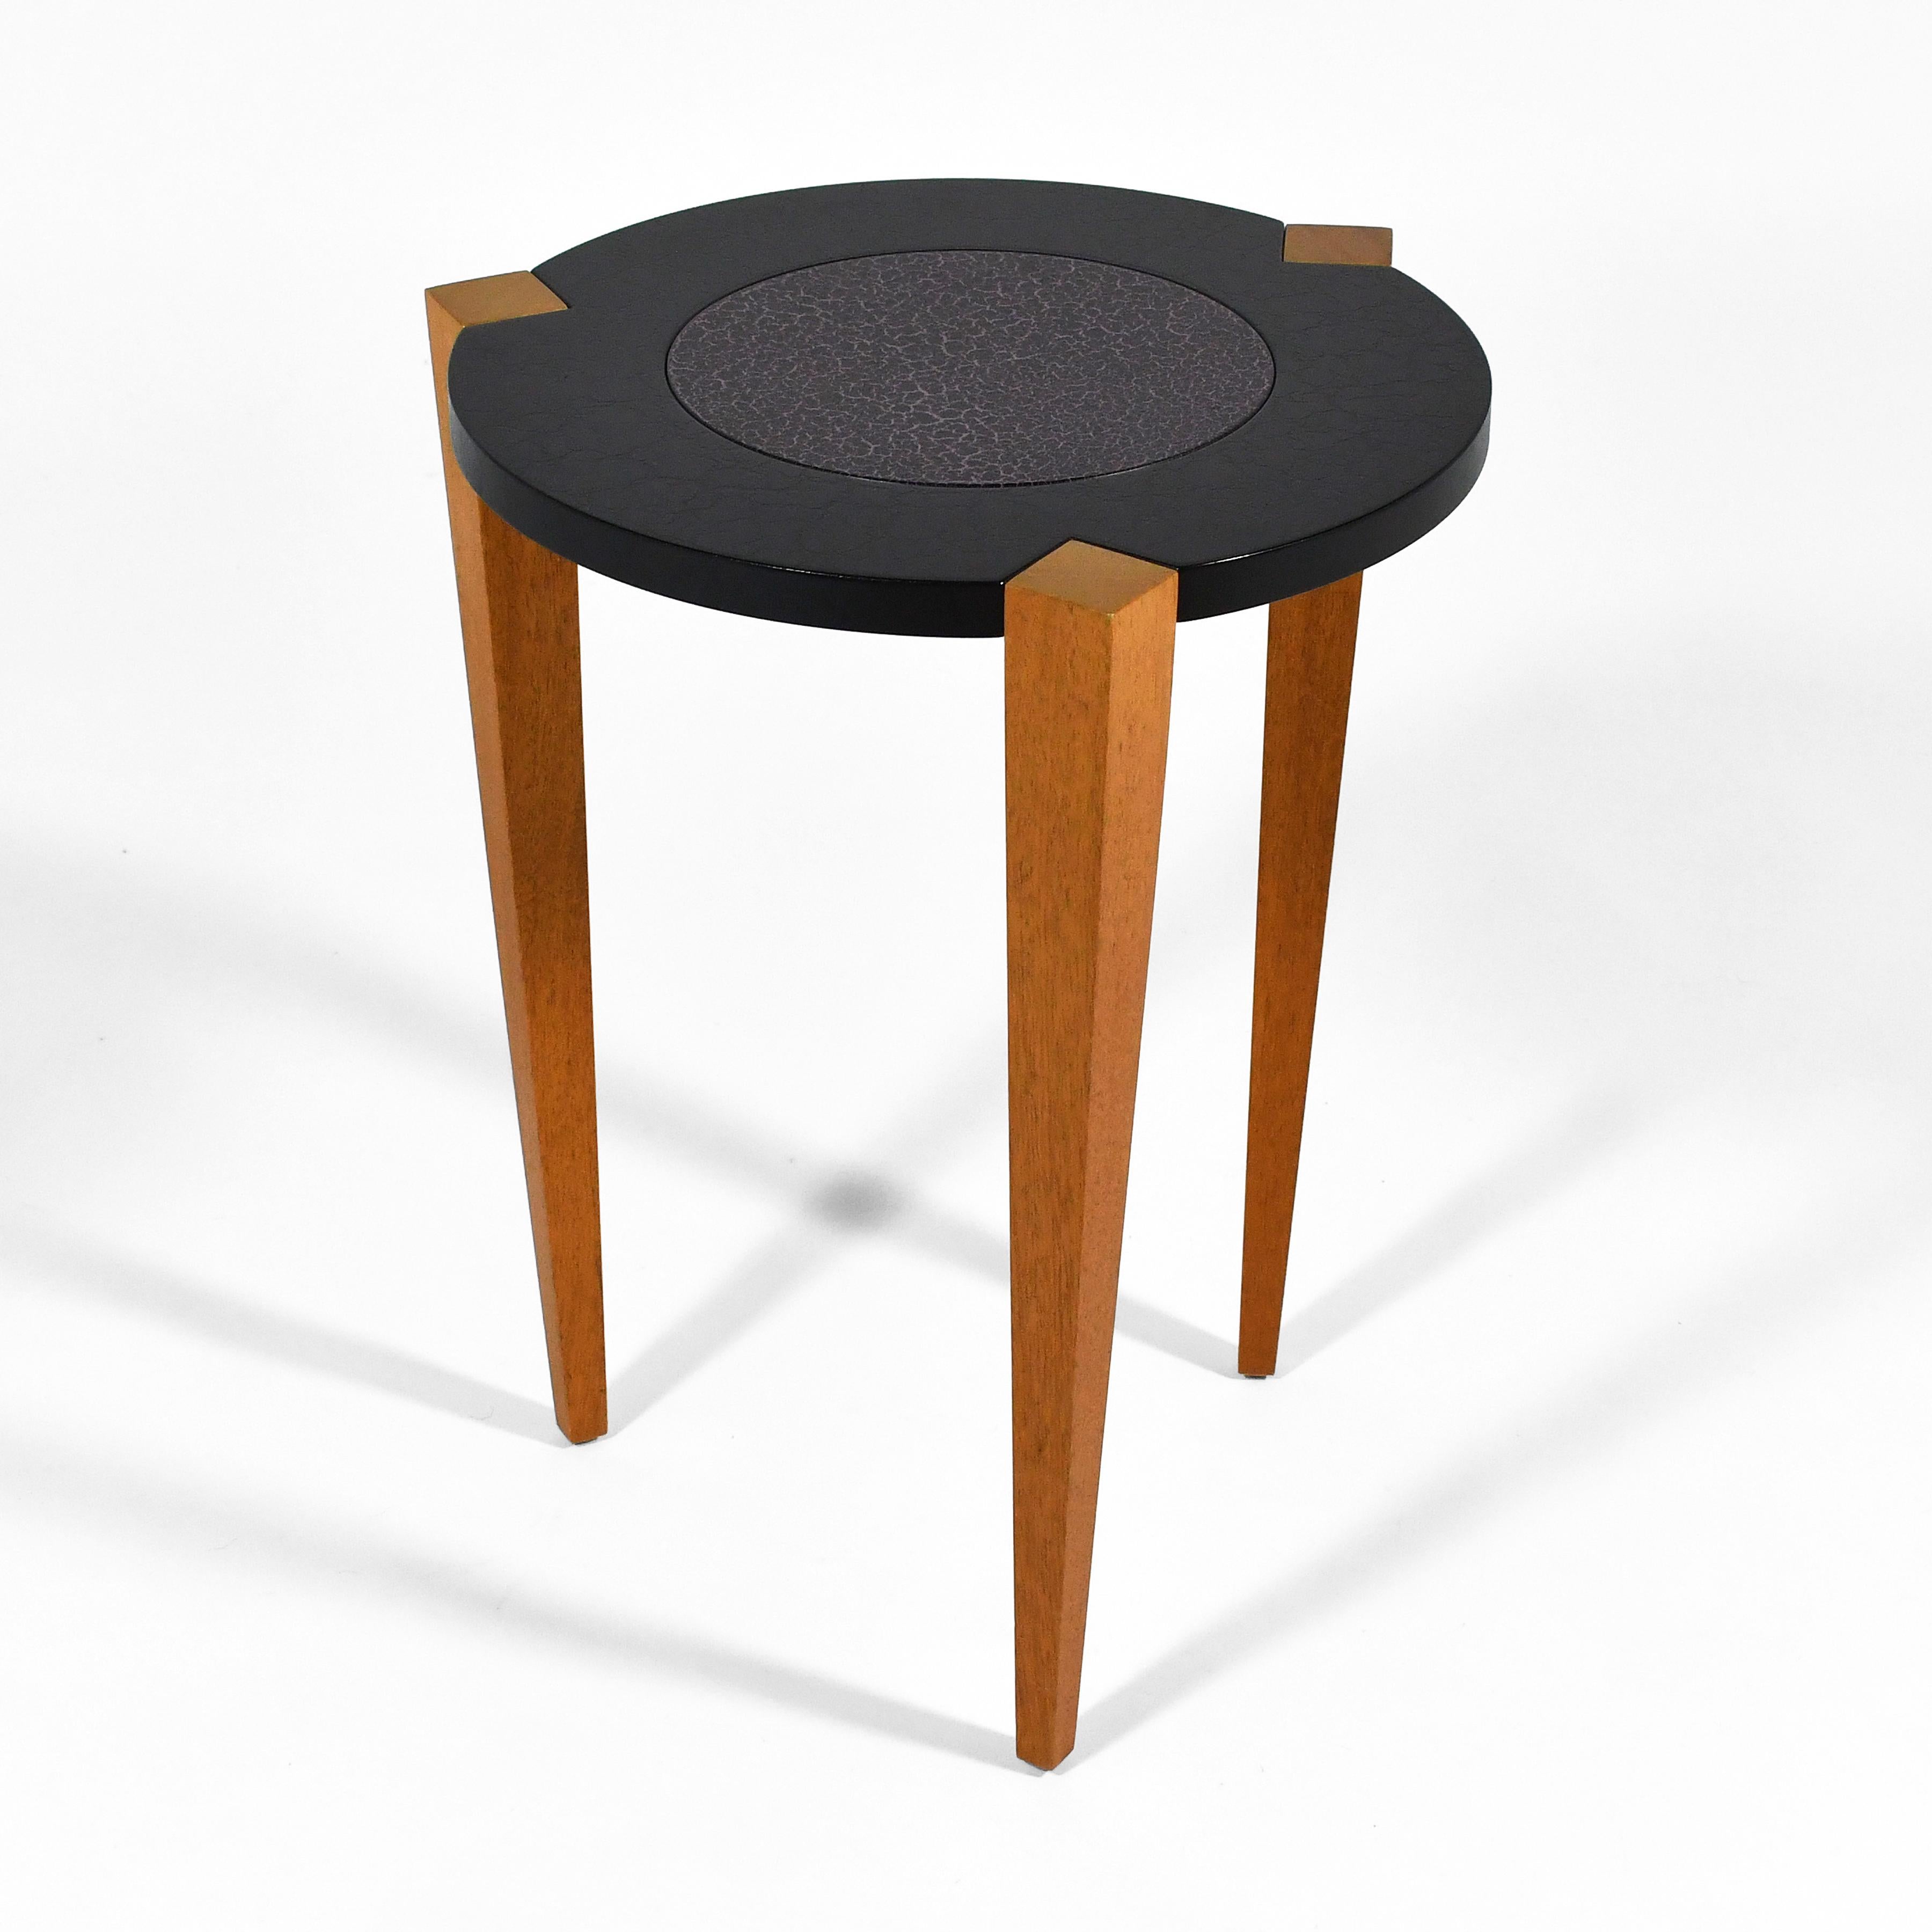 A playful post-modern design, this side table by Lee Weitzman is reductive in form, but also embraces surface decoration with the black and plumb crackled paint finish. The round top is supported by three tapered maple legs. Hand signed and dated on